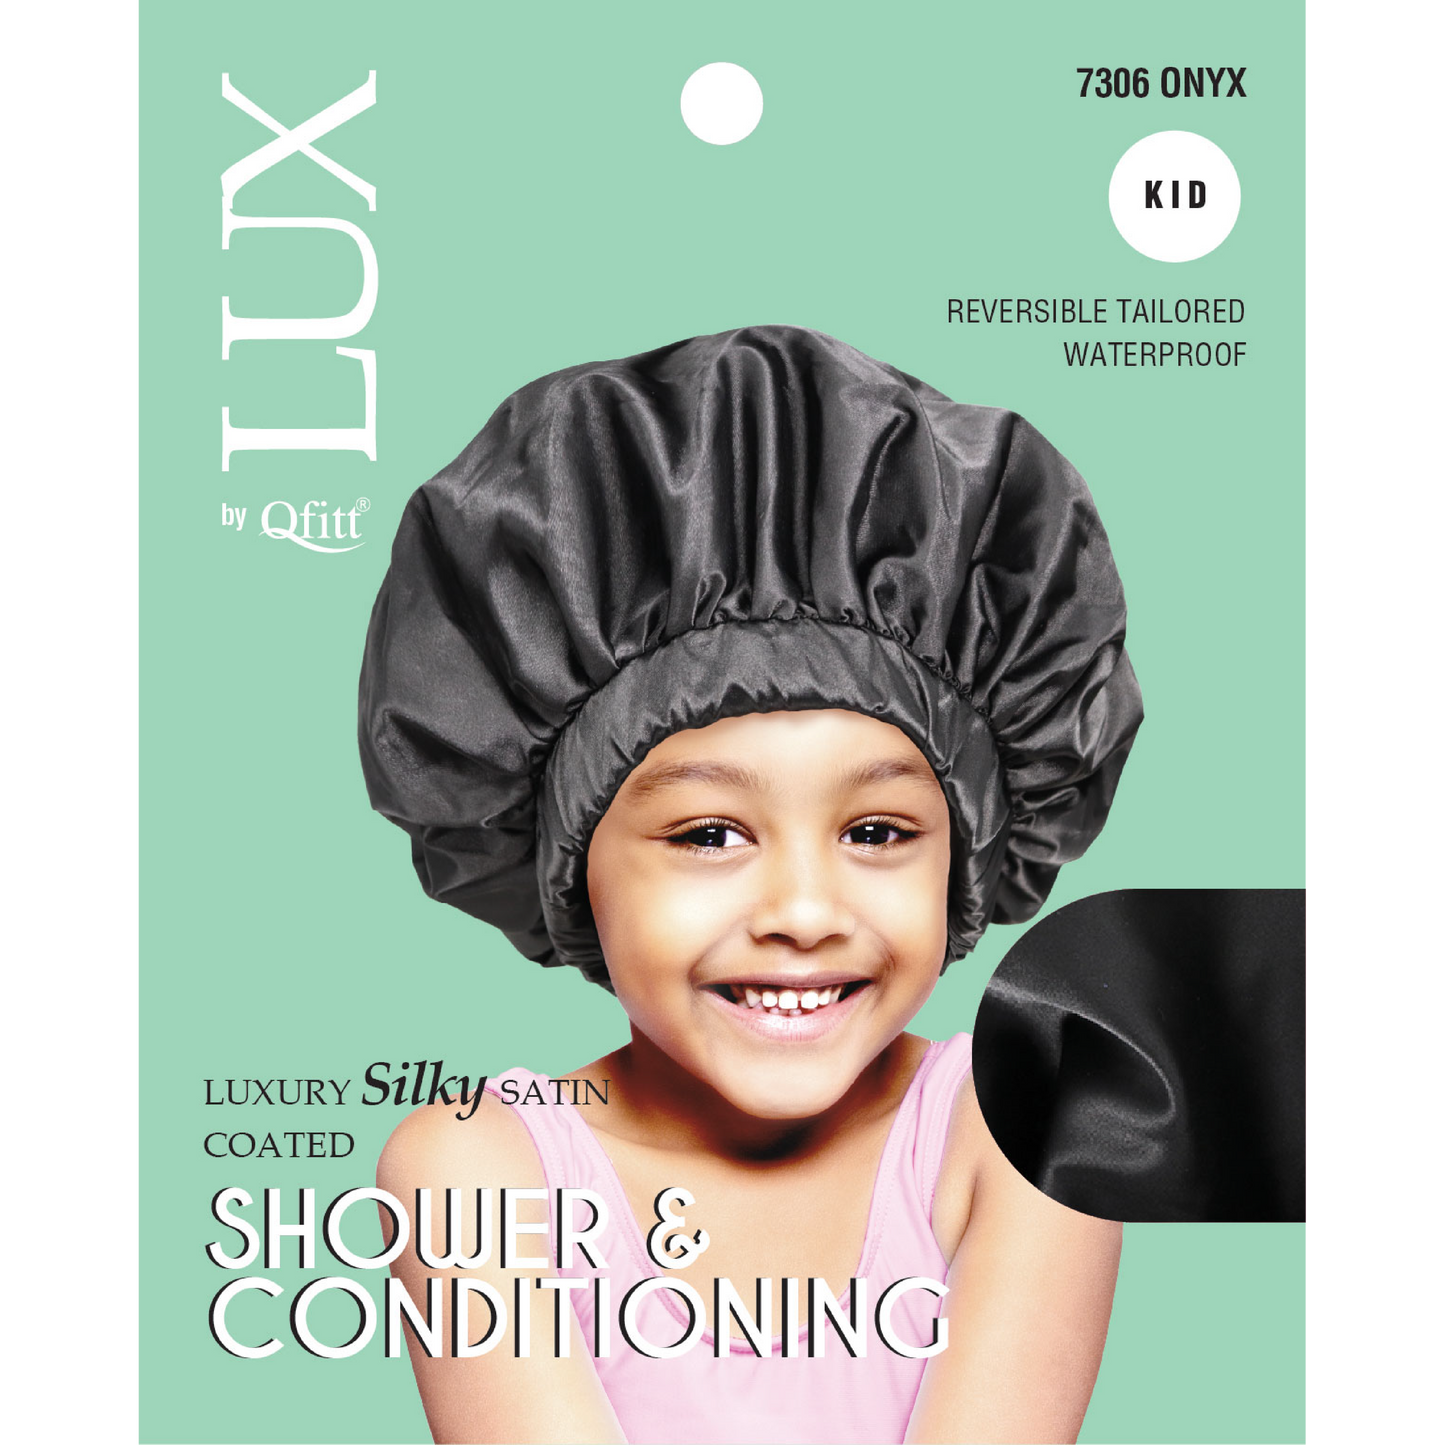 KIDS LUXURY SILKY SATIN COATED SHOWER & CONDITIONING - SOLID